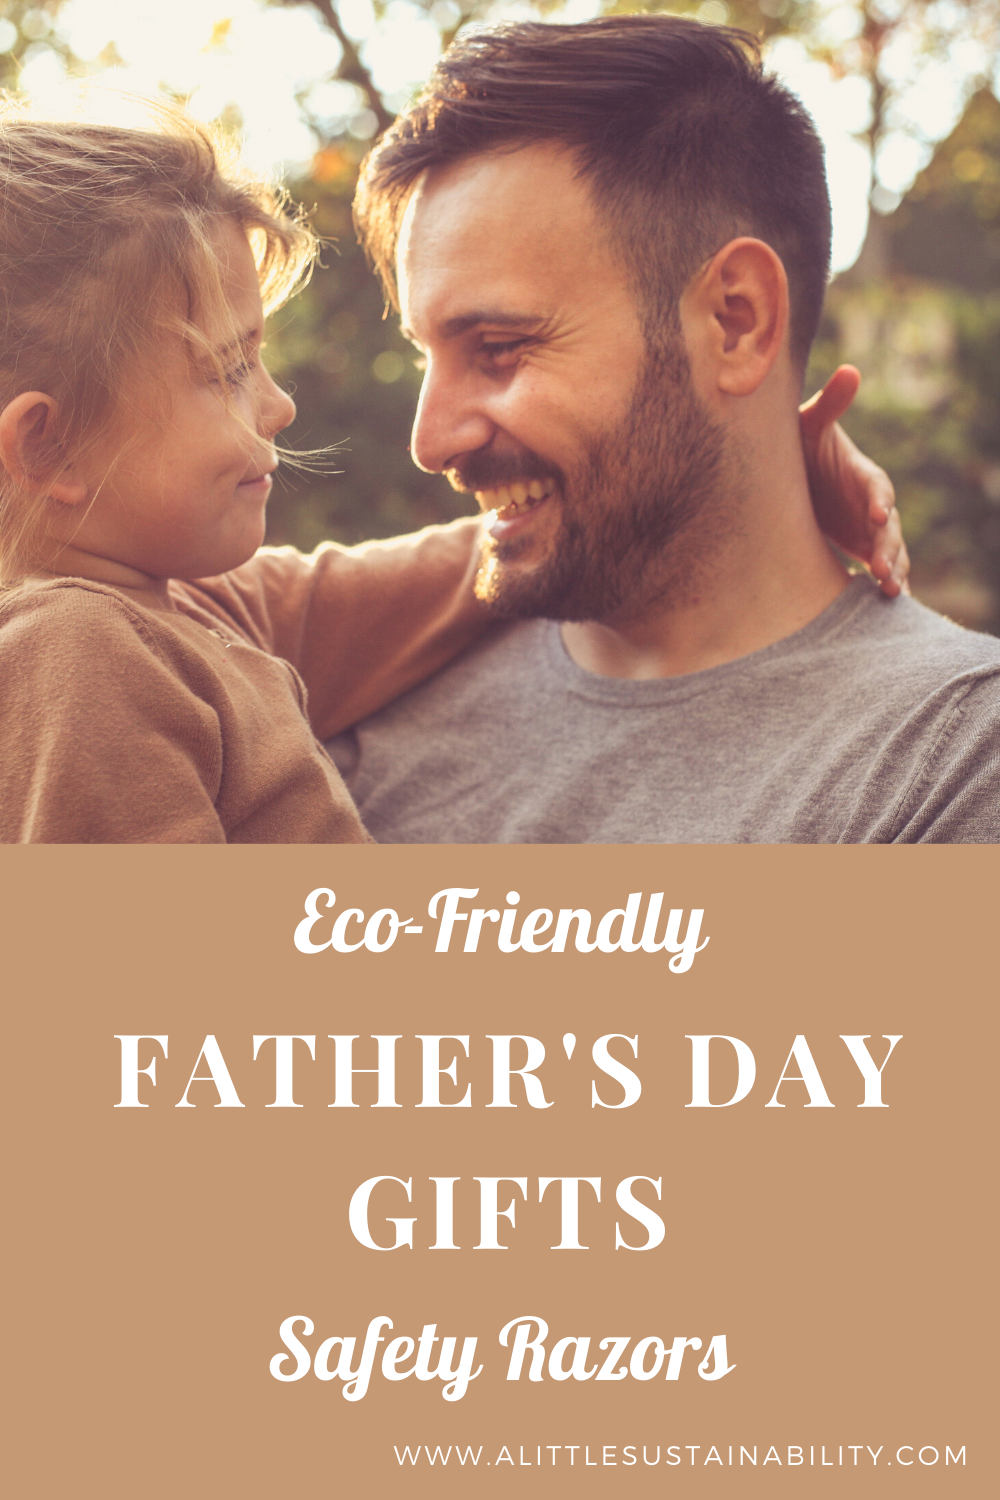 Eco-friendly Father's Day gifts - safety razors. Safety razors are a great eco-friendly alternative to disposable razors that dad will love. No more throwing out razors straight to the landfill. The best safety razors are highlighted in this list of zero waste options for shaving.